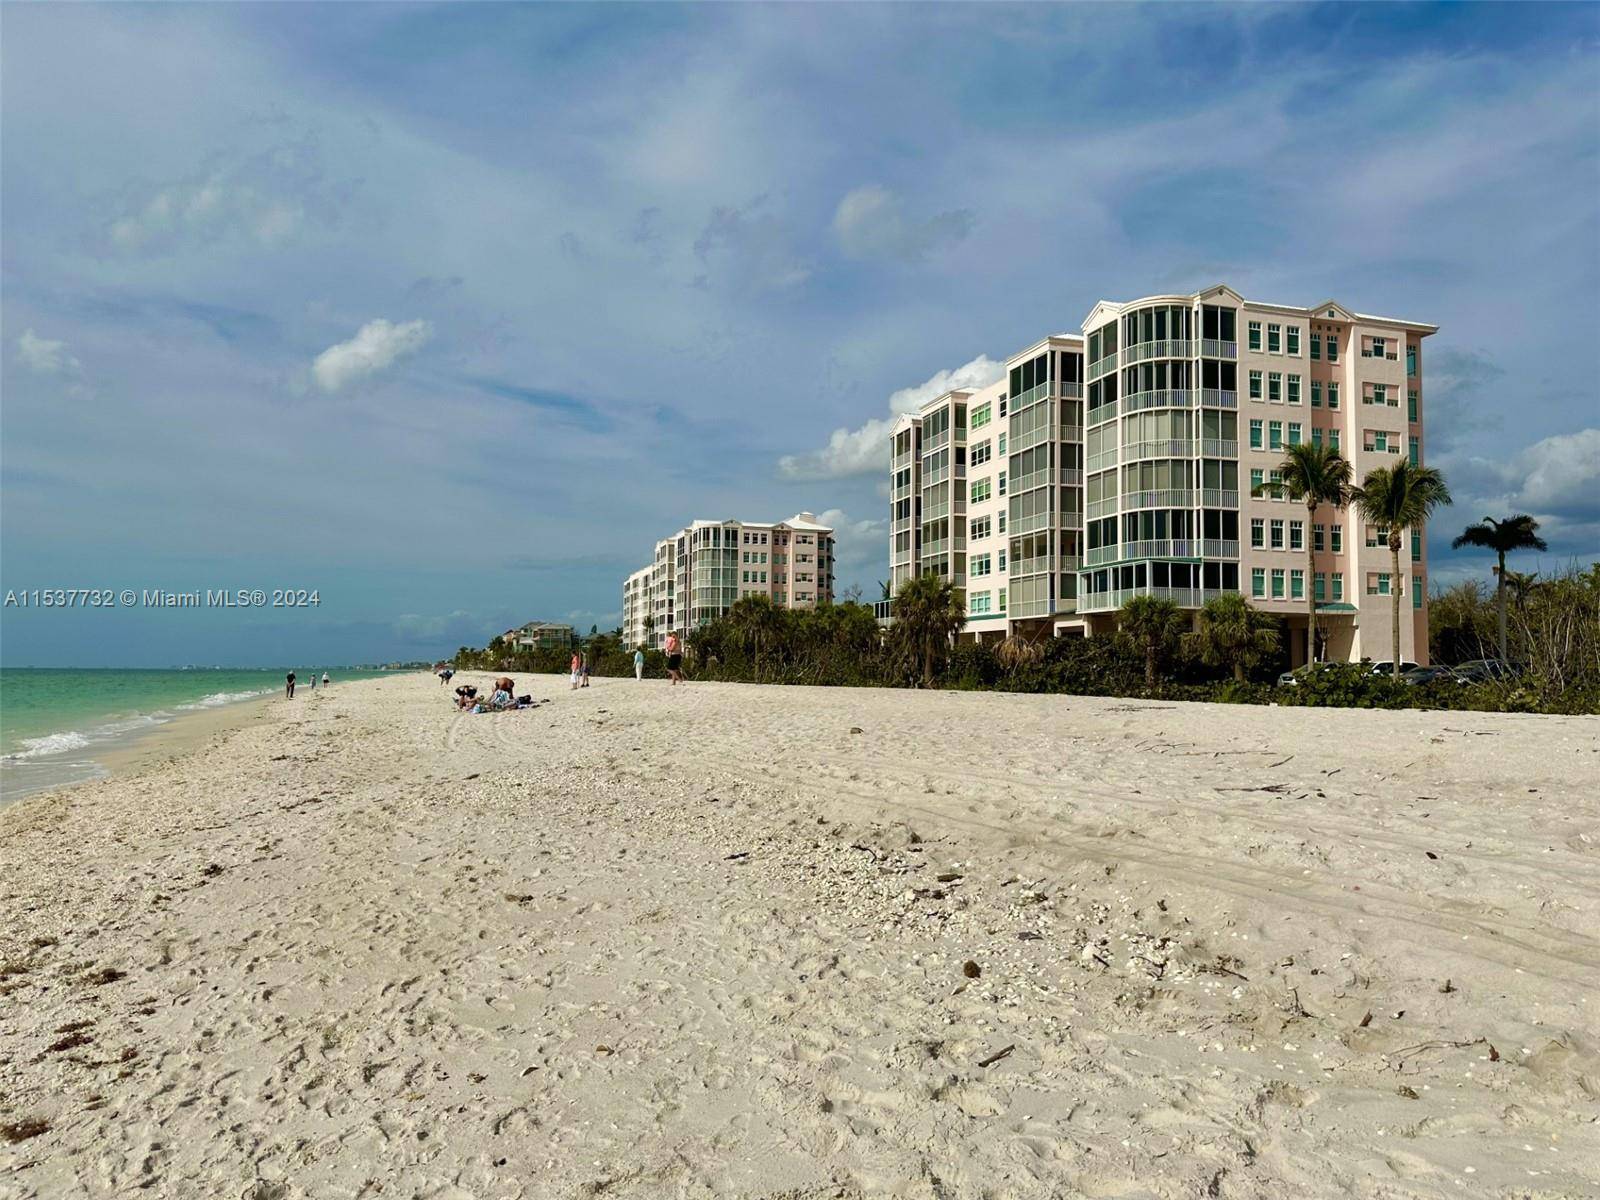 INDULGE IN THE COASTAL LIFESTYLE OF EXCLUSIVE BAREFOOT BEACH CLUB IN THIS OCEAN FRONT JEWEL, JUST MINUTES FROM GREAT RESTAURANTS, BARS SHOPPING.